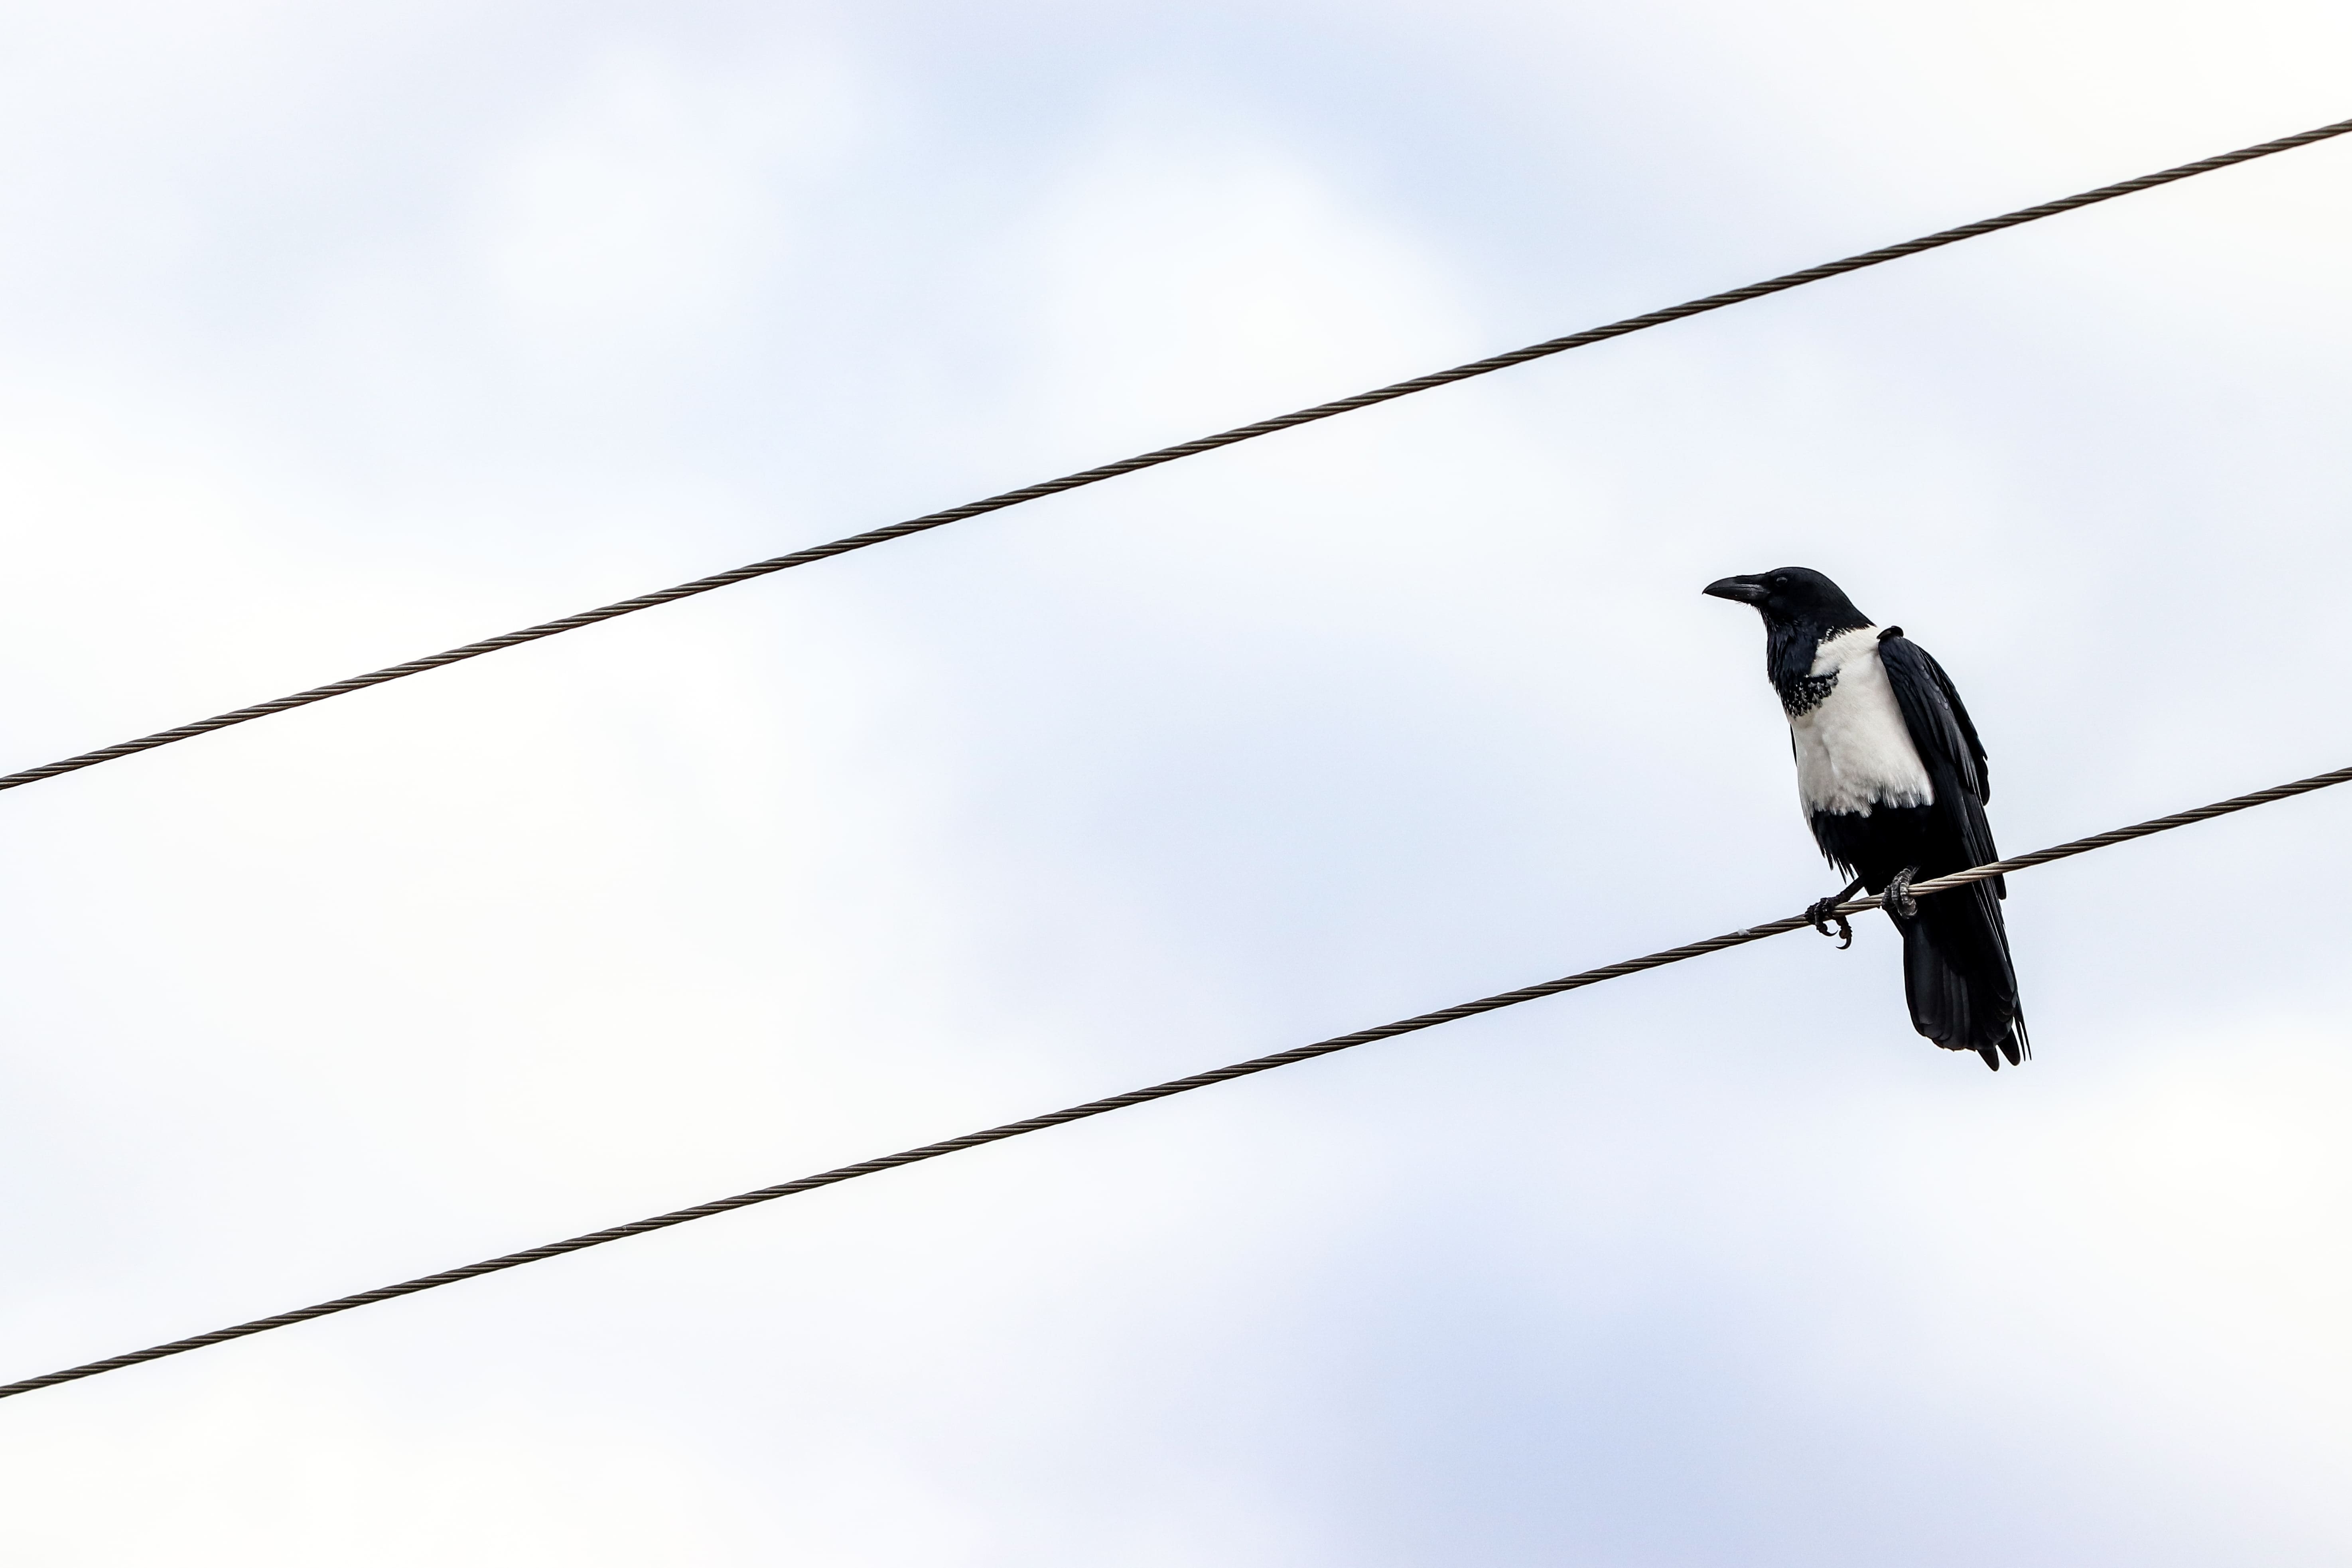 A solitary crow perched on a wire against a clear sky.